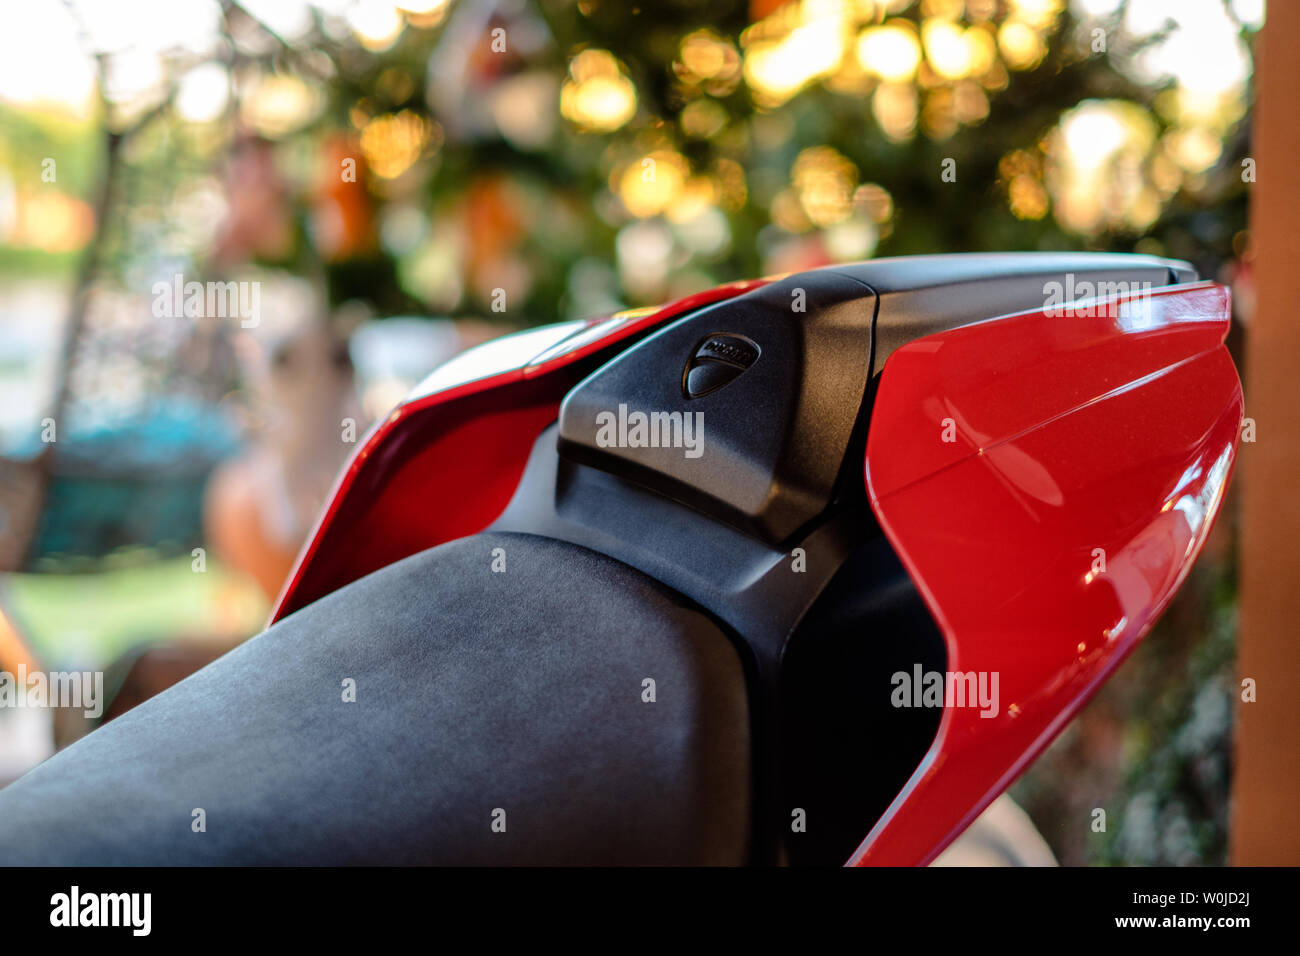 Bangkok Thailand Dec 24 2017 The Ducati 959 Panigale Red And Black Rear On Glowing Bokeh In House At Sunset Stock Photo Alamy